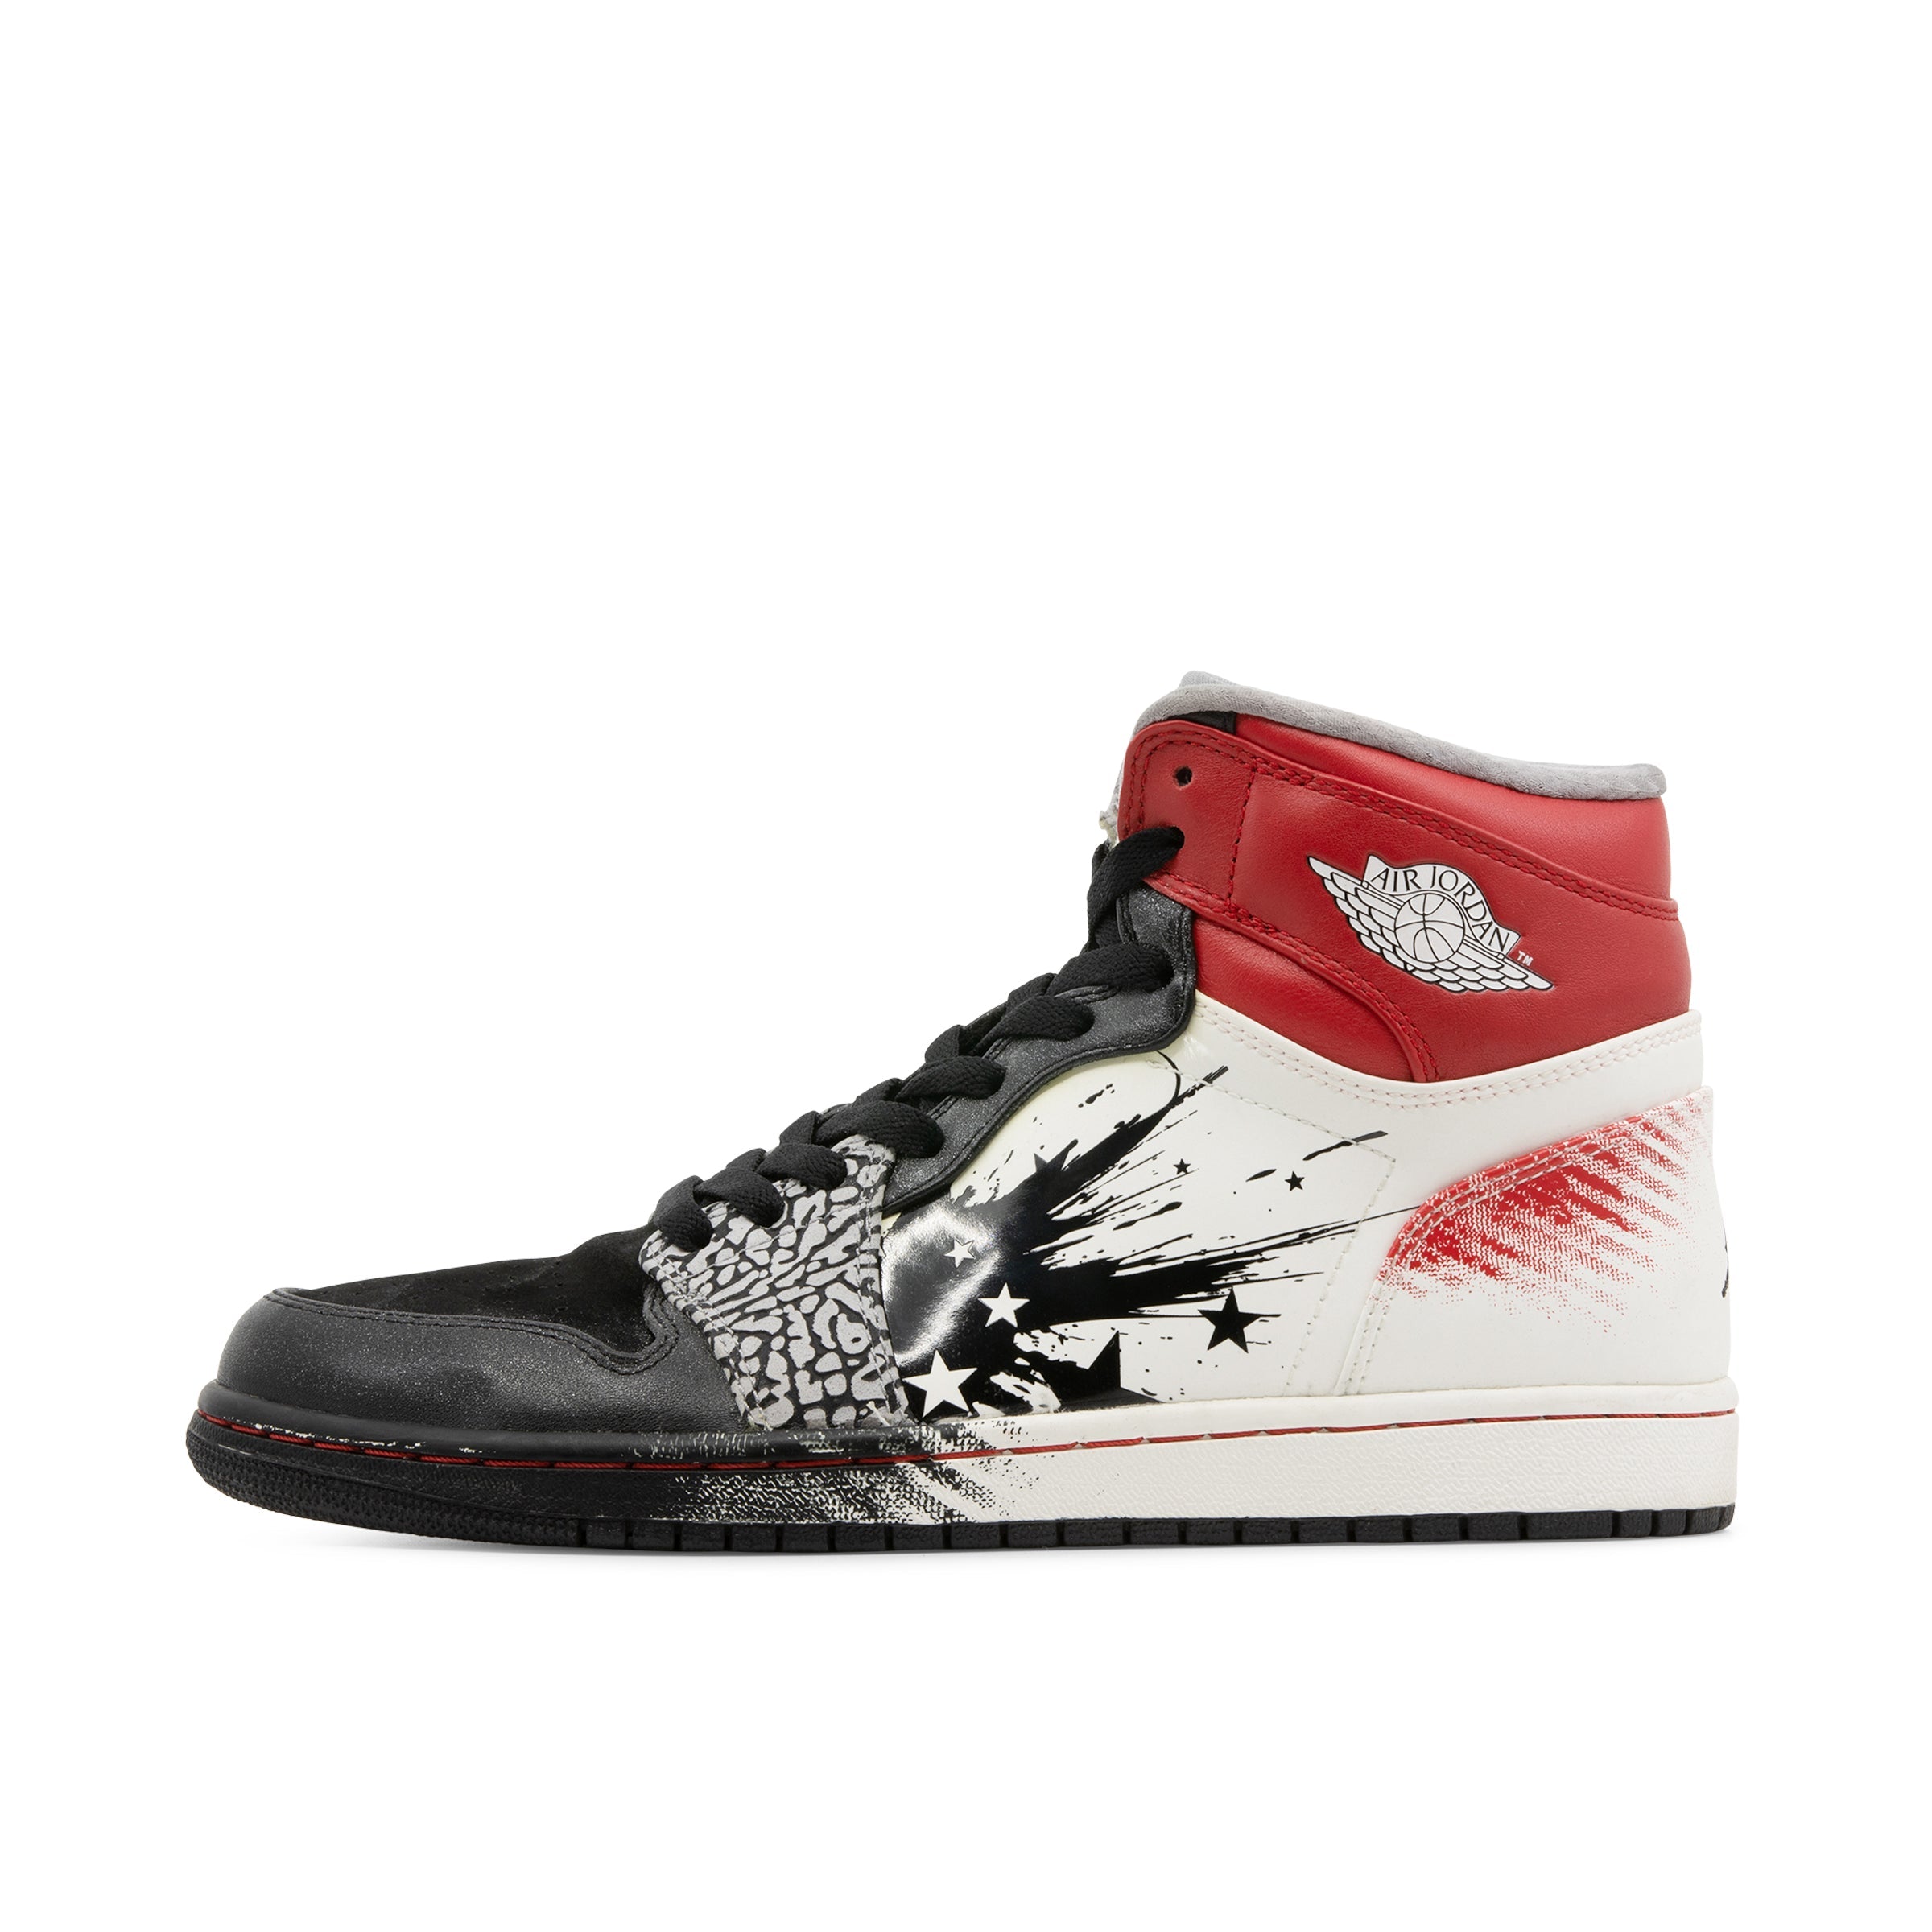 AIR JORDAN 1 HIGH DAVE WHITE WINGS OF THE FUTURE